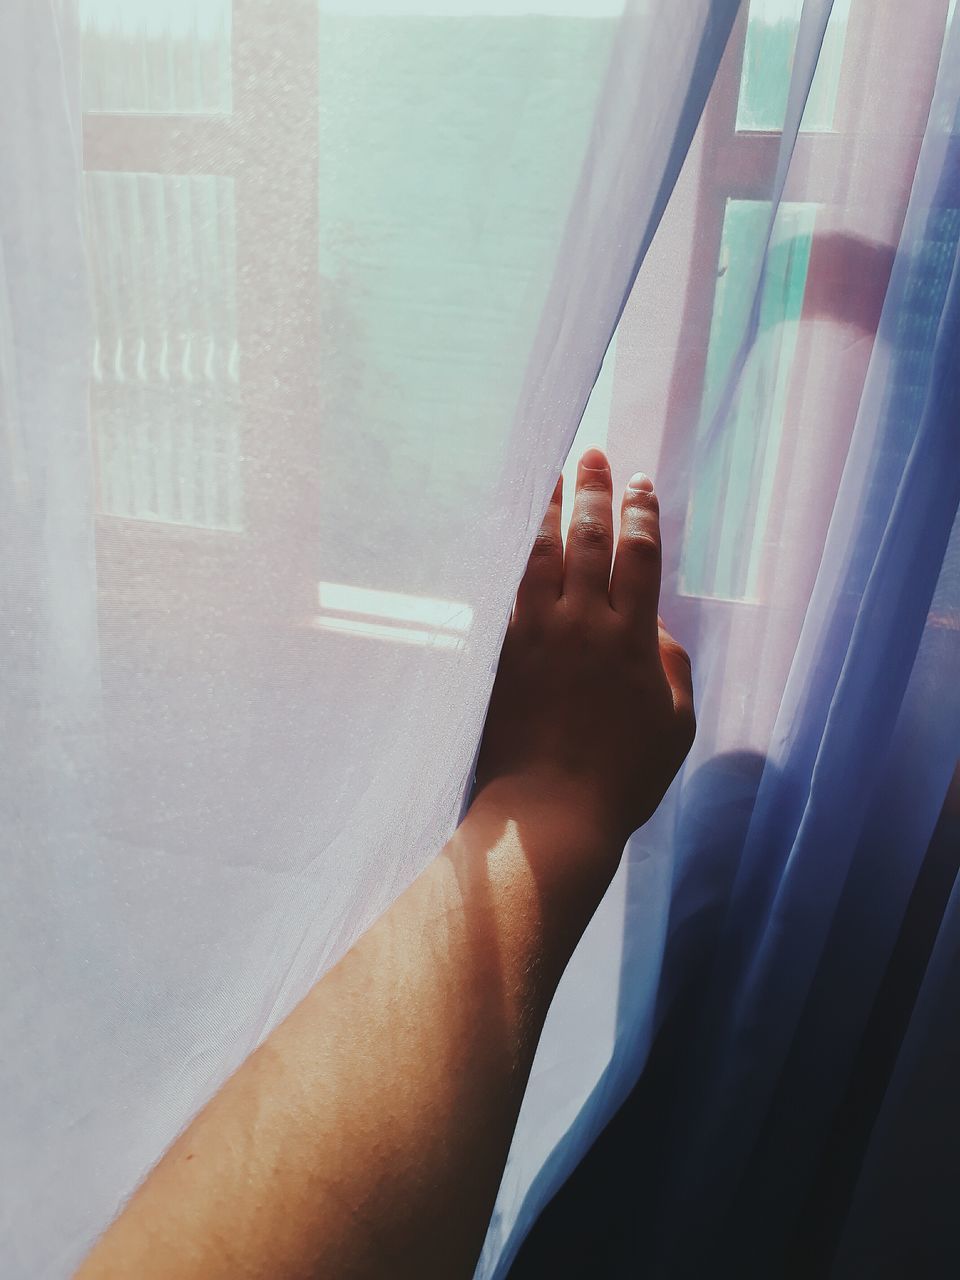 real people, window, human body part, one person, body part, human hand, indoors, hand, day, mode of transportation, glass - material, curtain, transportation, lifestyles, transparent, sunlight, personal perspective, vehicle interior, finger, human limb